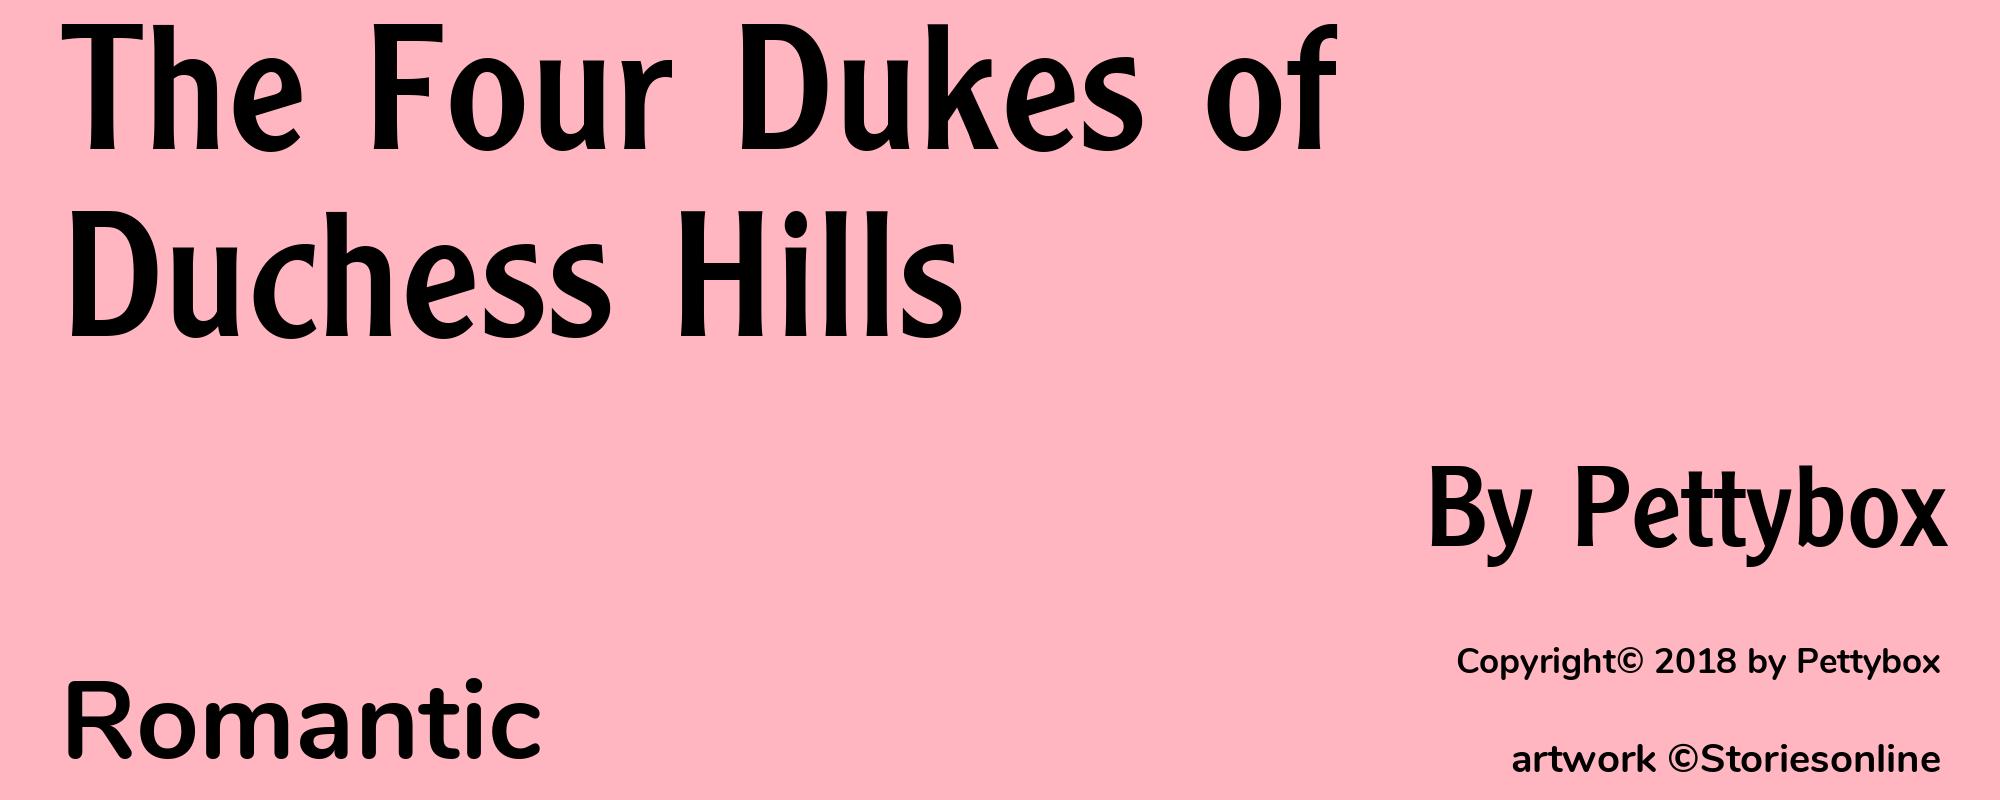 The Four Dukes of Duchess Hills - Cover